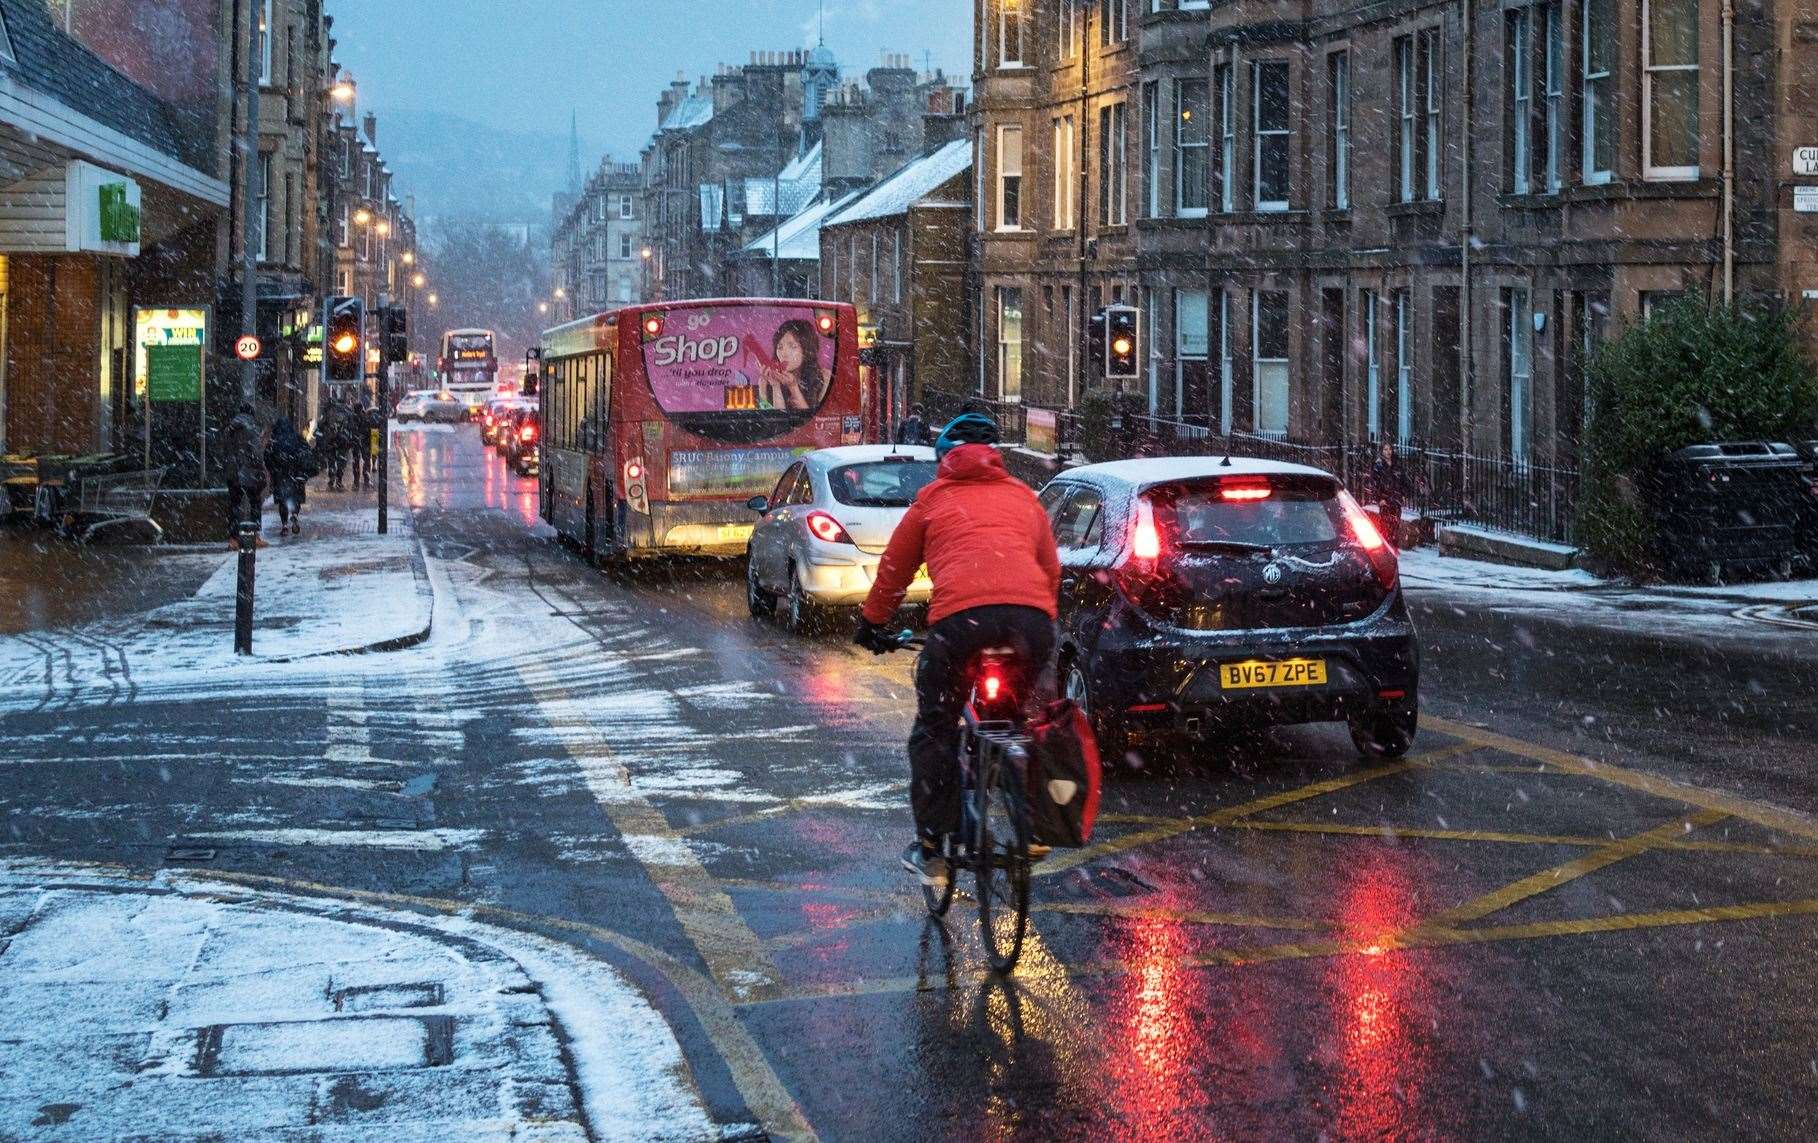 An AA survey saw almost nine in 10 drivers admit ‘cyclists can be hard to see’. Image: iStock.